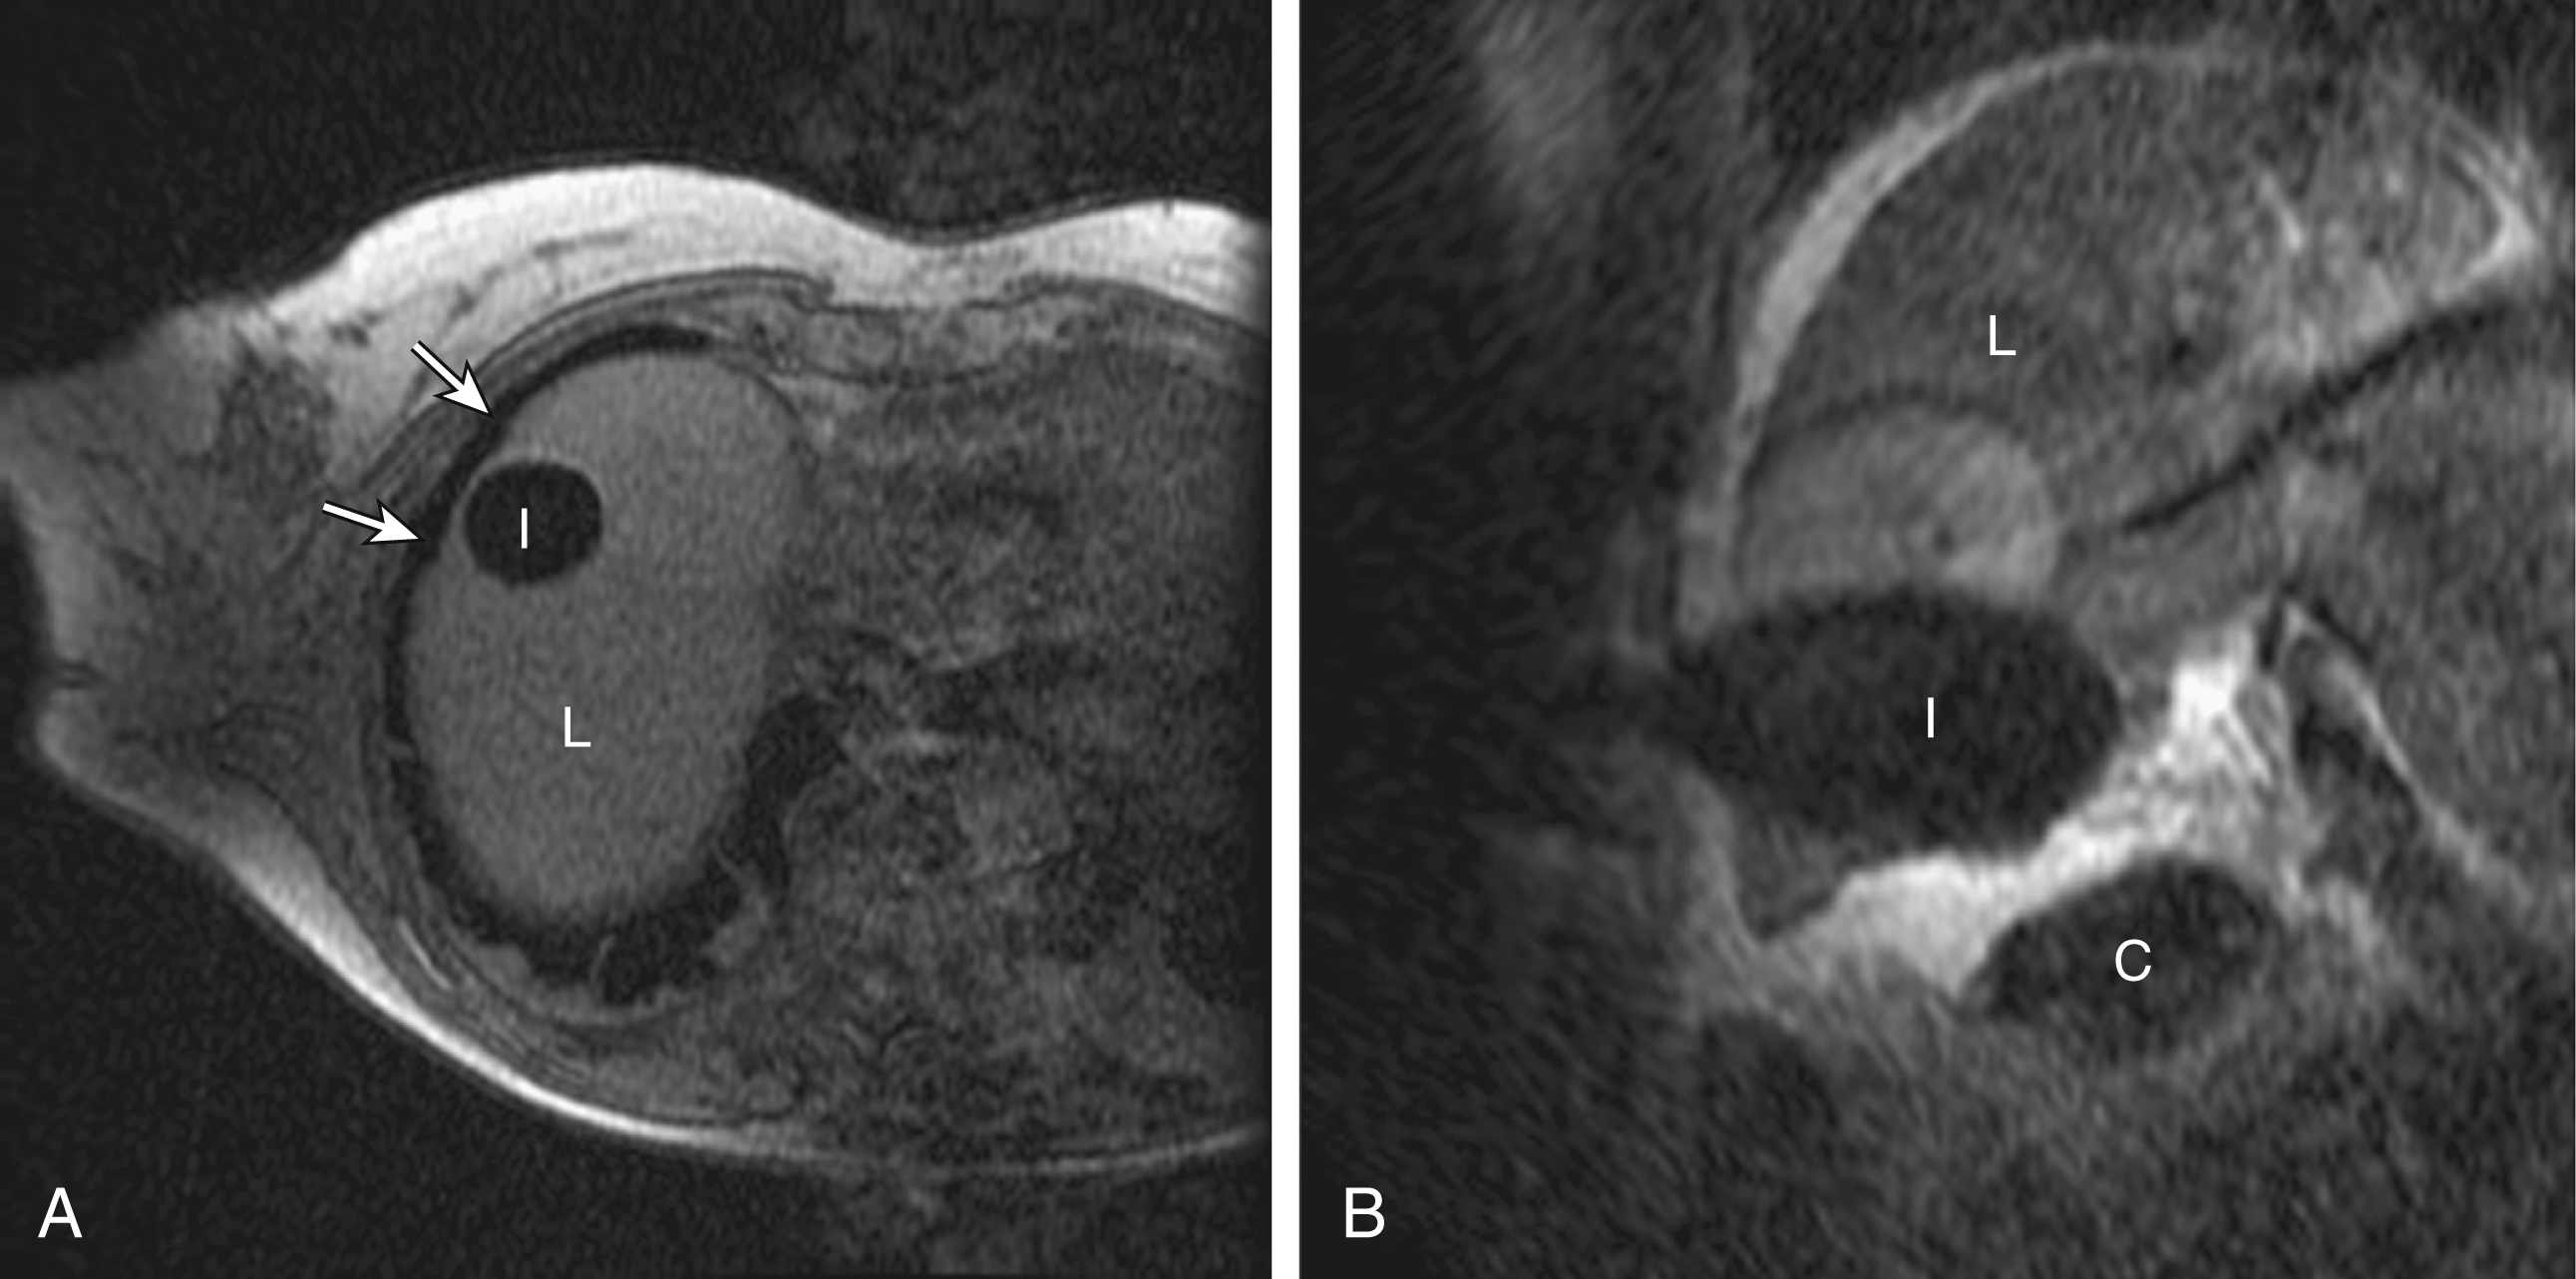 Fig. 98.2, Image-guided control demonstrated in two separate ablation procedures. (A) Intraprocedural axial T1 magnetic resonance image (MRI) shows critical relationships several minutes into a multiprobe freeze of a liver metastasis in the dome of the liver. The iceball ( I ) within the liver ( L ) is observed as its lateral edge approaches adjacent lung ( arrows ). Such clear visualization of the field allows the radiologist to adjust the rate of freezing to protect normal tissues. (B) Intraprocedural coronal T2 MRI provides guidance to protect adjacent structures by additional interventional techniques. The multiprobe freezing of a metastasis is conducted in the liver ( L ). The colon ( C ) is protected from the iceball ( I ) because it has been distanced by hydrodissection, the injection of saline through additional percutaneous needles (not seen in the image plane). 61 The saline is seen here as the hyperintense region between the ice ( I ) and colon ( C ).